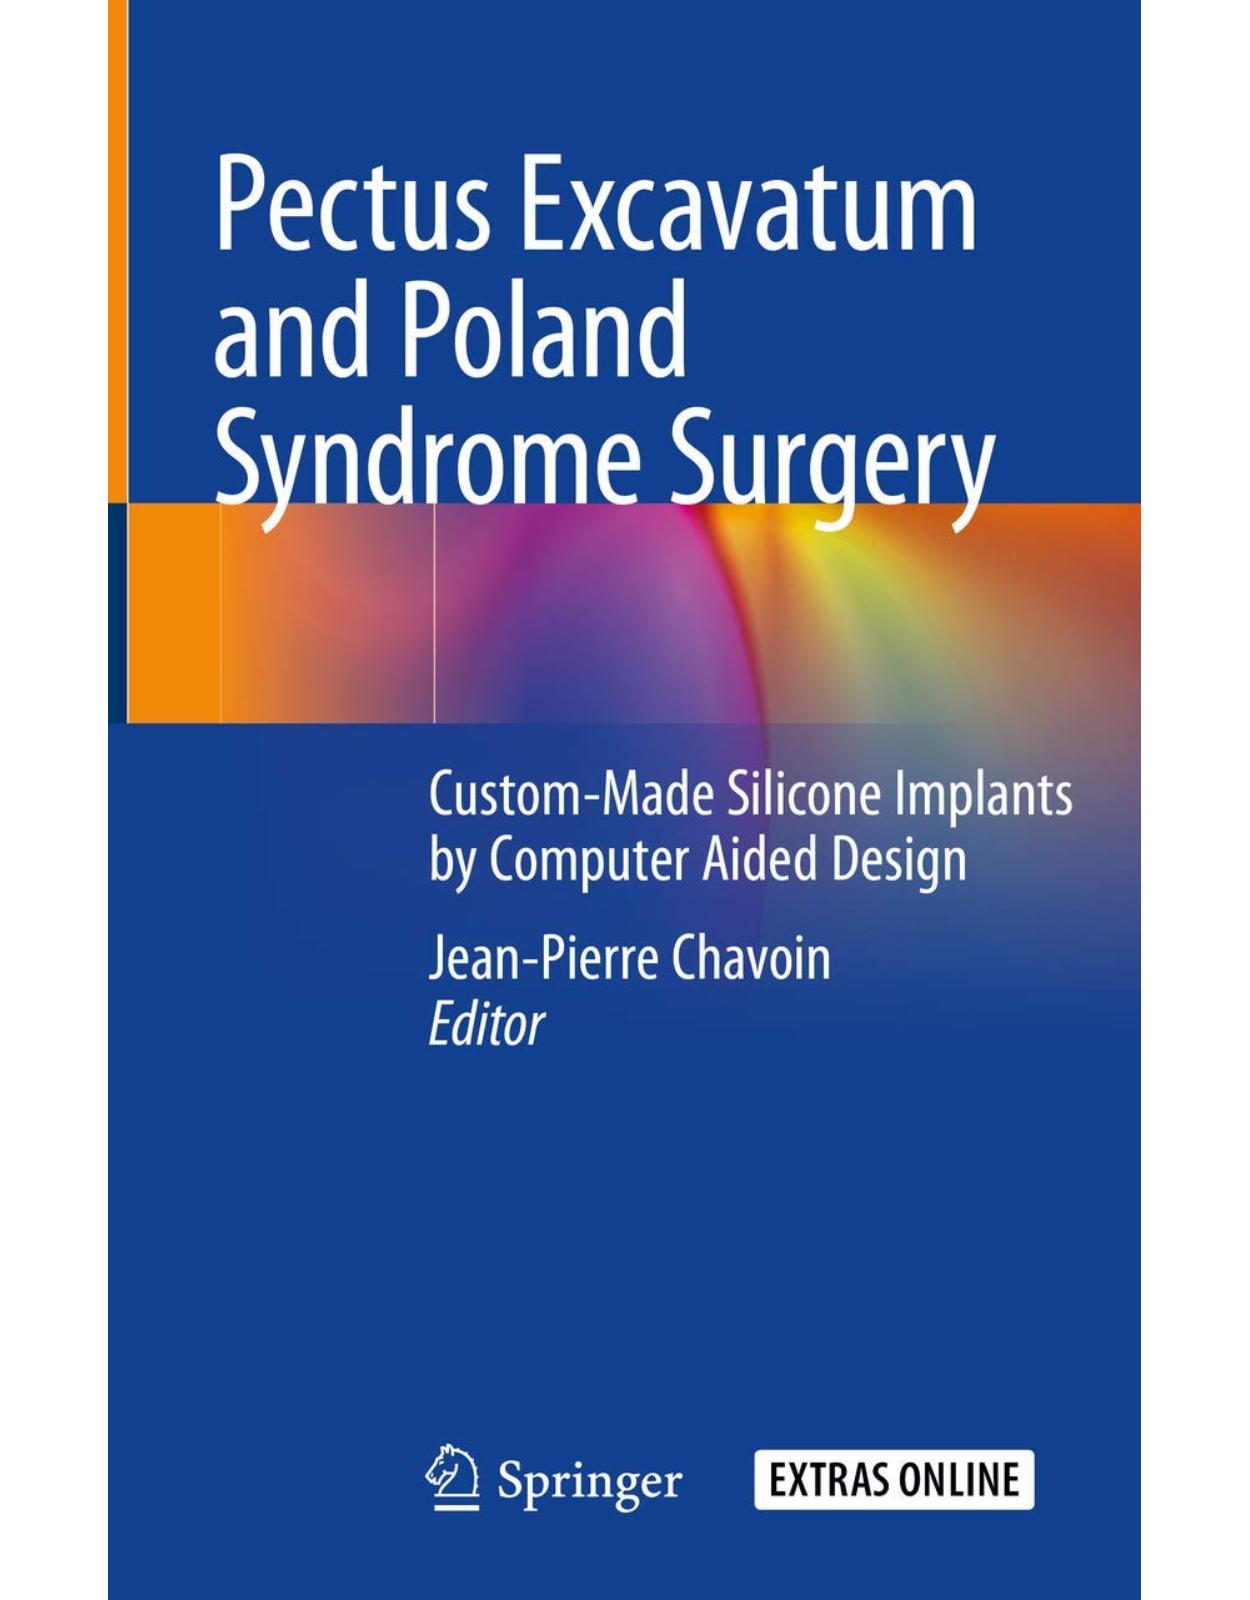 Pectus Excavatum and Poland Syndrome Surgery: Custom-Made Silicone Implants by Computer Aided Design